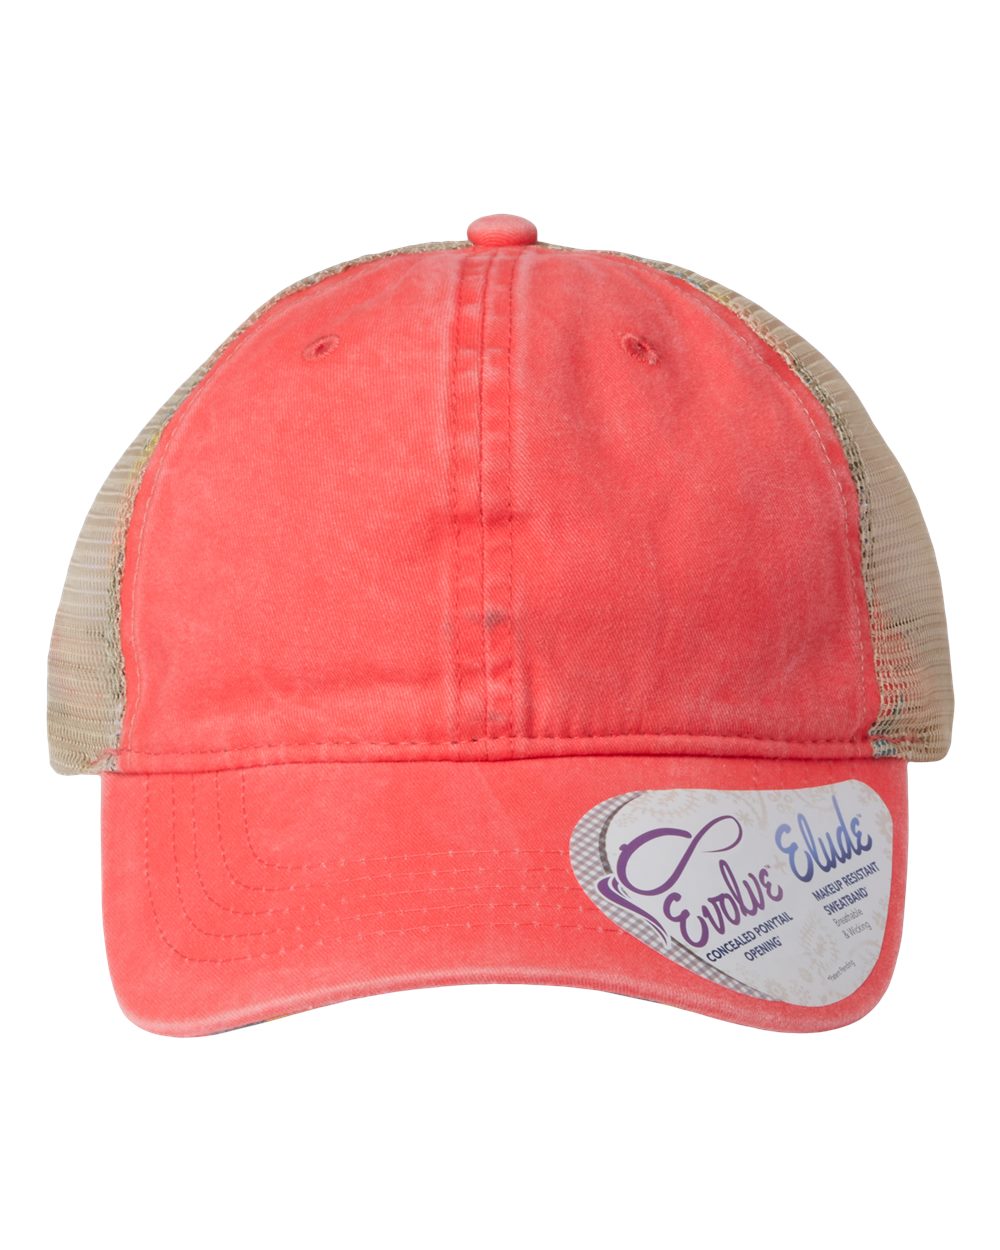 A women's washed mesh-back cap in sherbet with a striped pattern on the front panel.